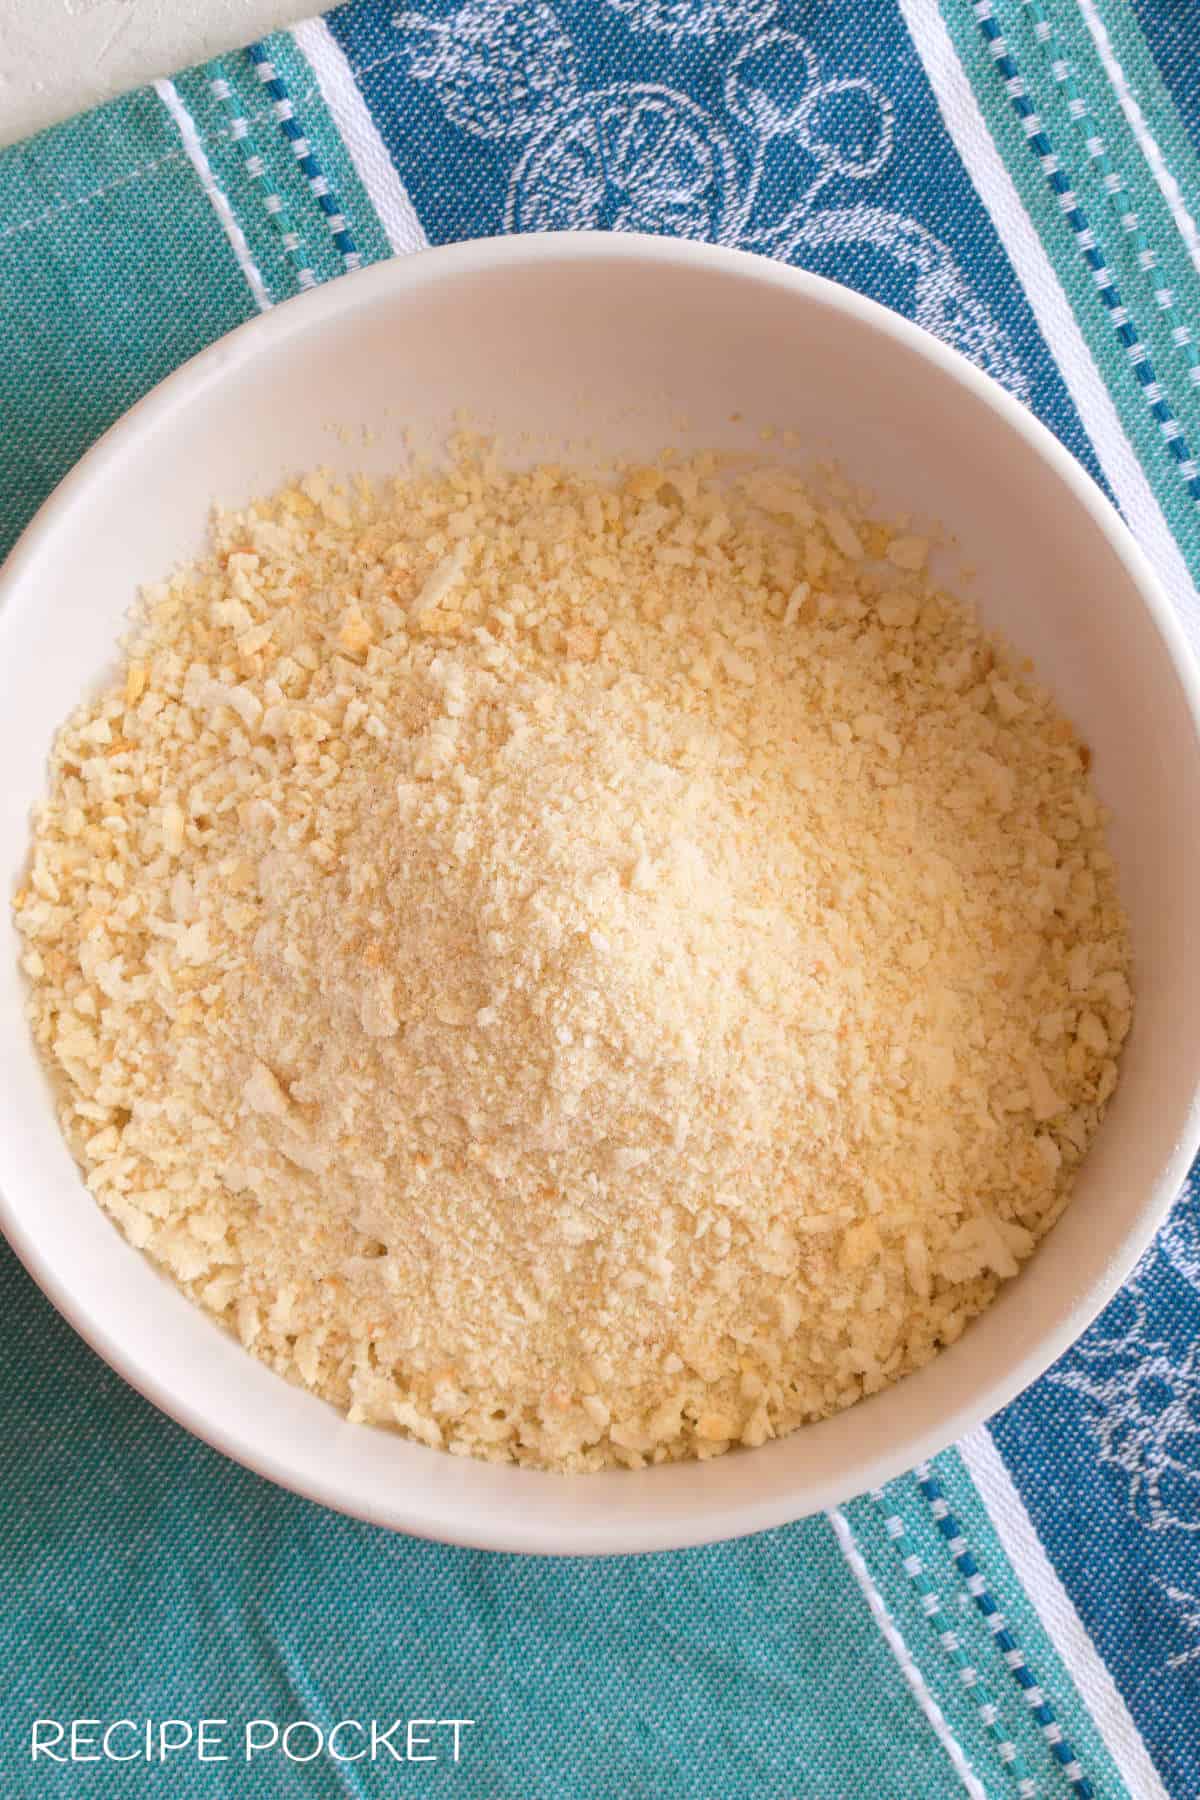 Breadcrumbs in a white dish on a blue green cloth.